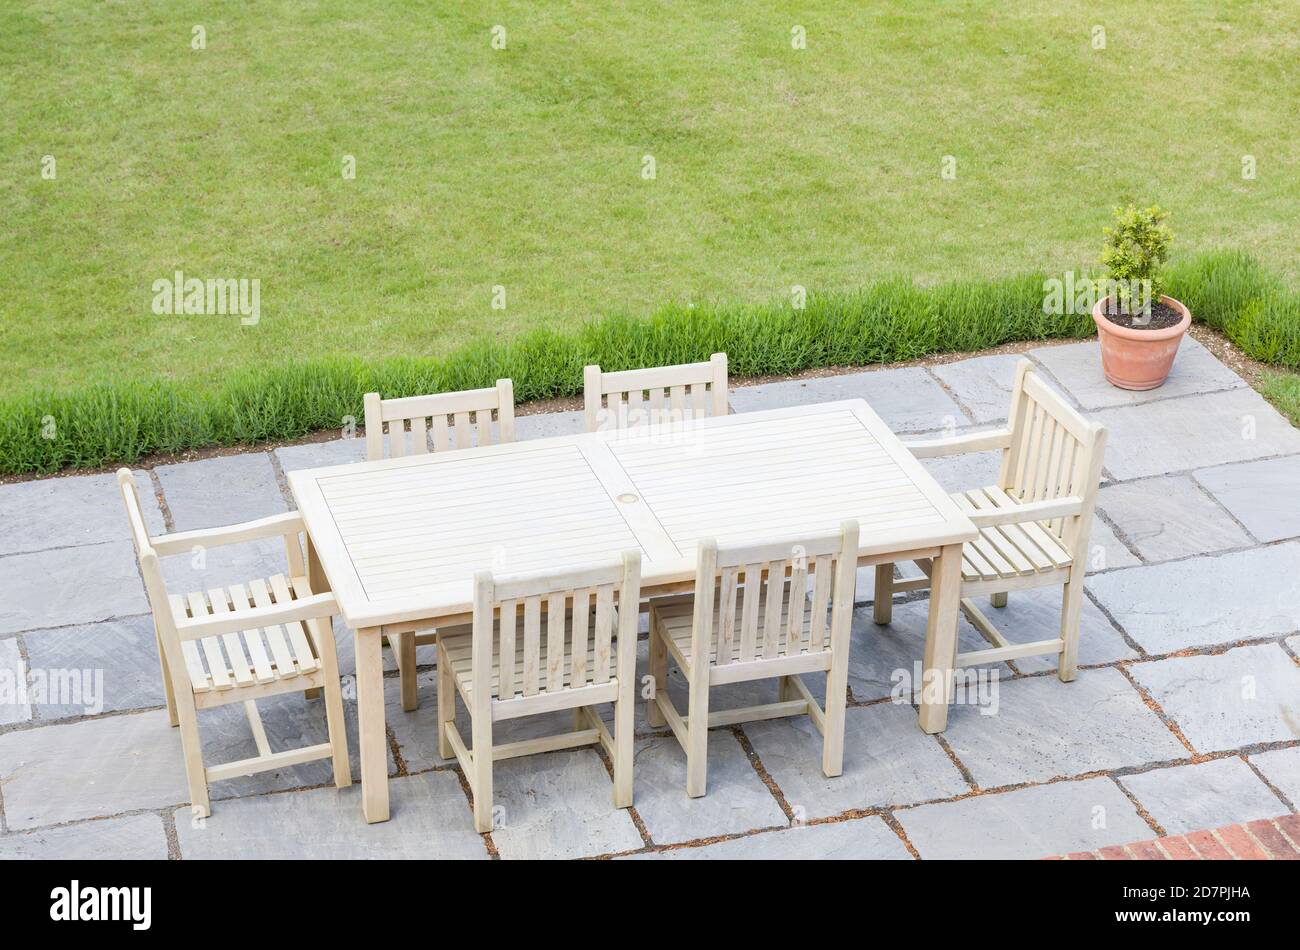 Wooden garden furniture on a patio terrace in a UK back garden with lawn Stock Photo